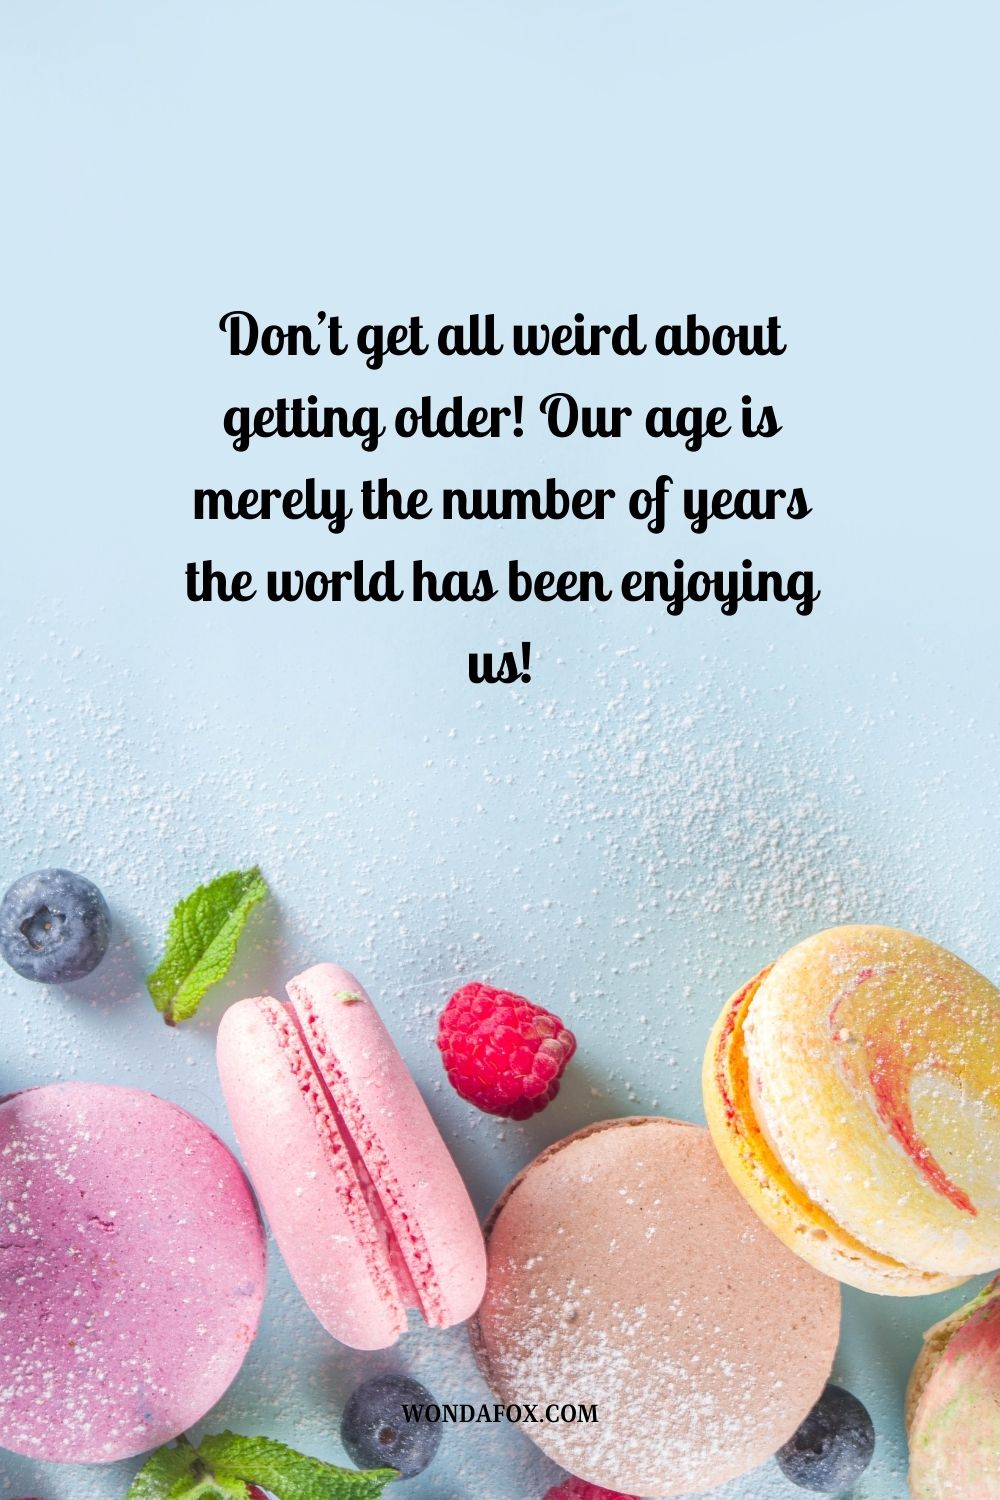 “Don’t get all weird about getting older! Our age is merely the number of years the world has been enjoying us!”